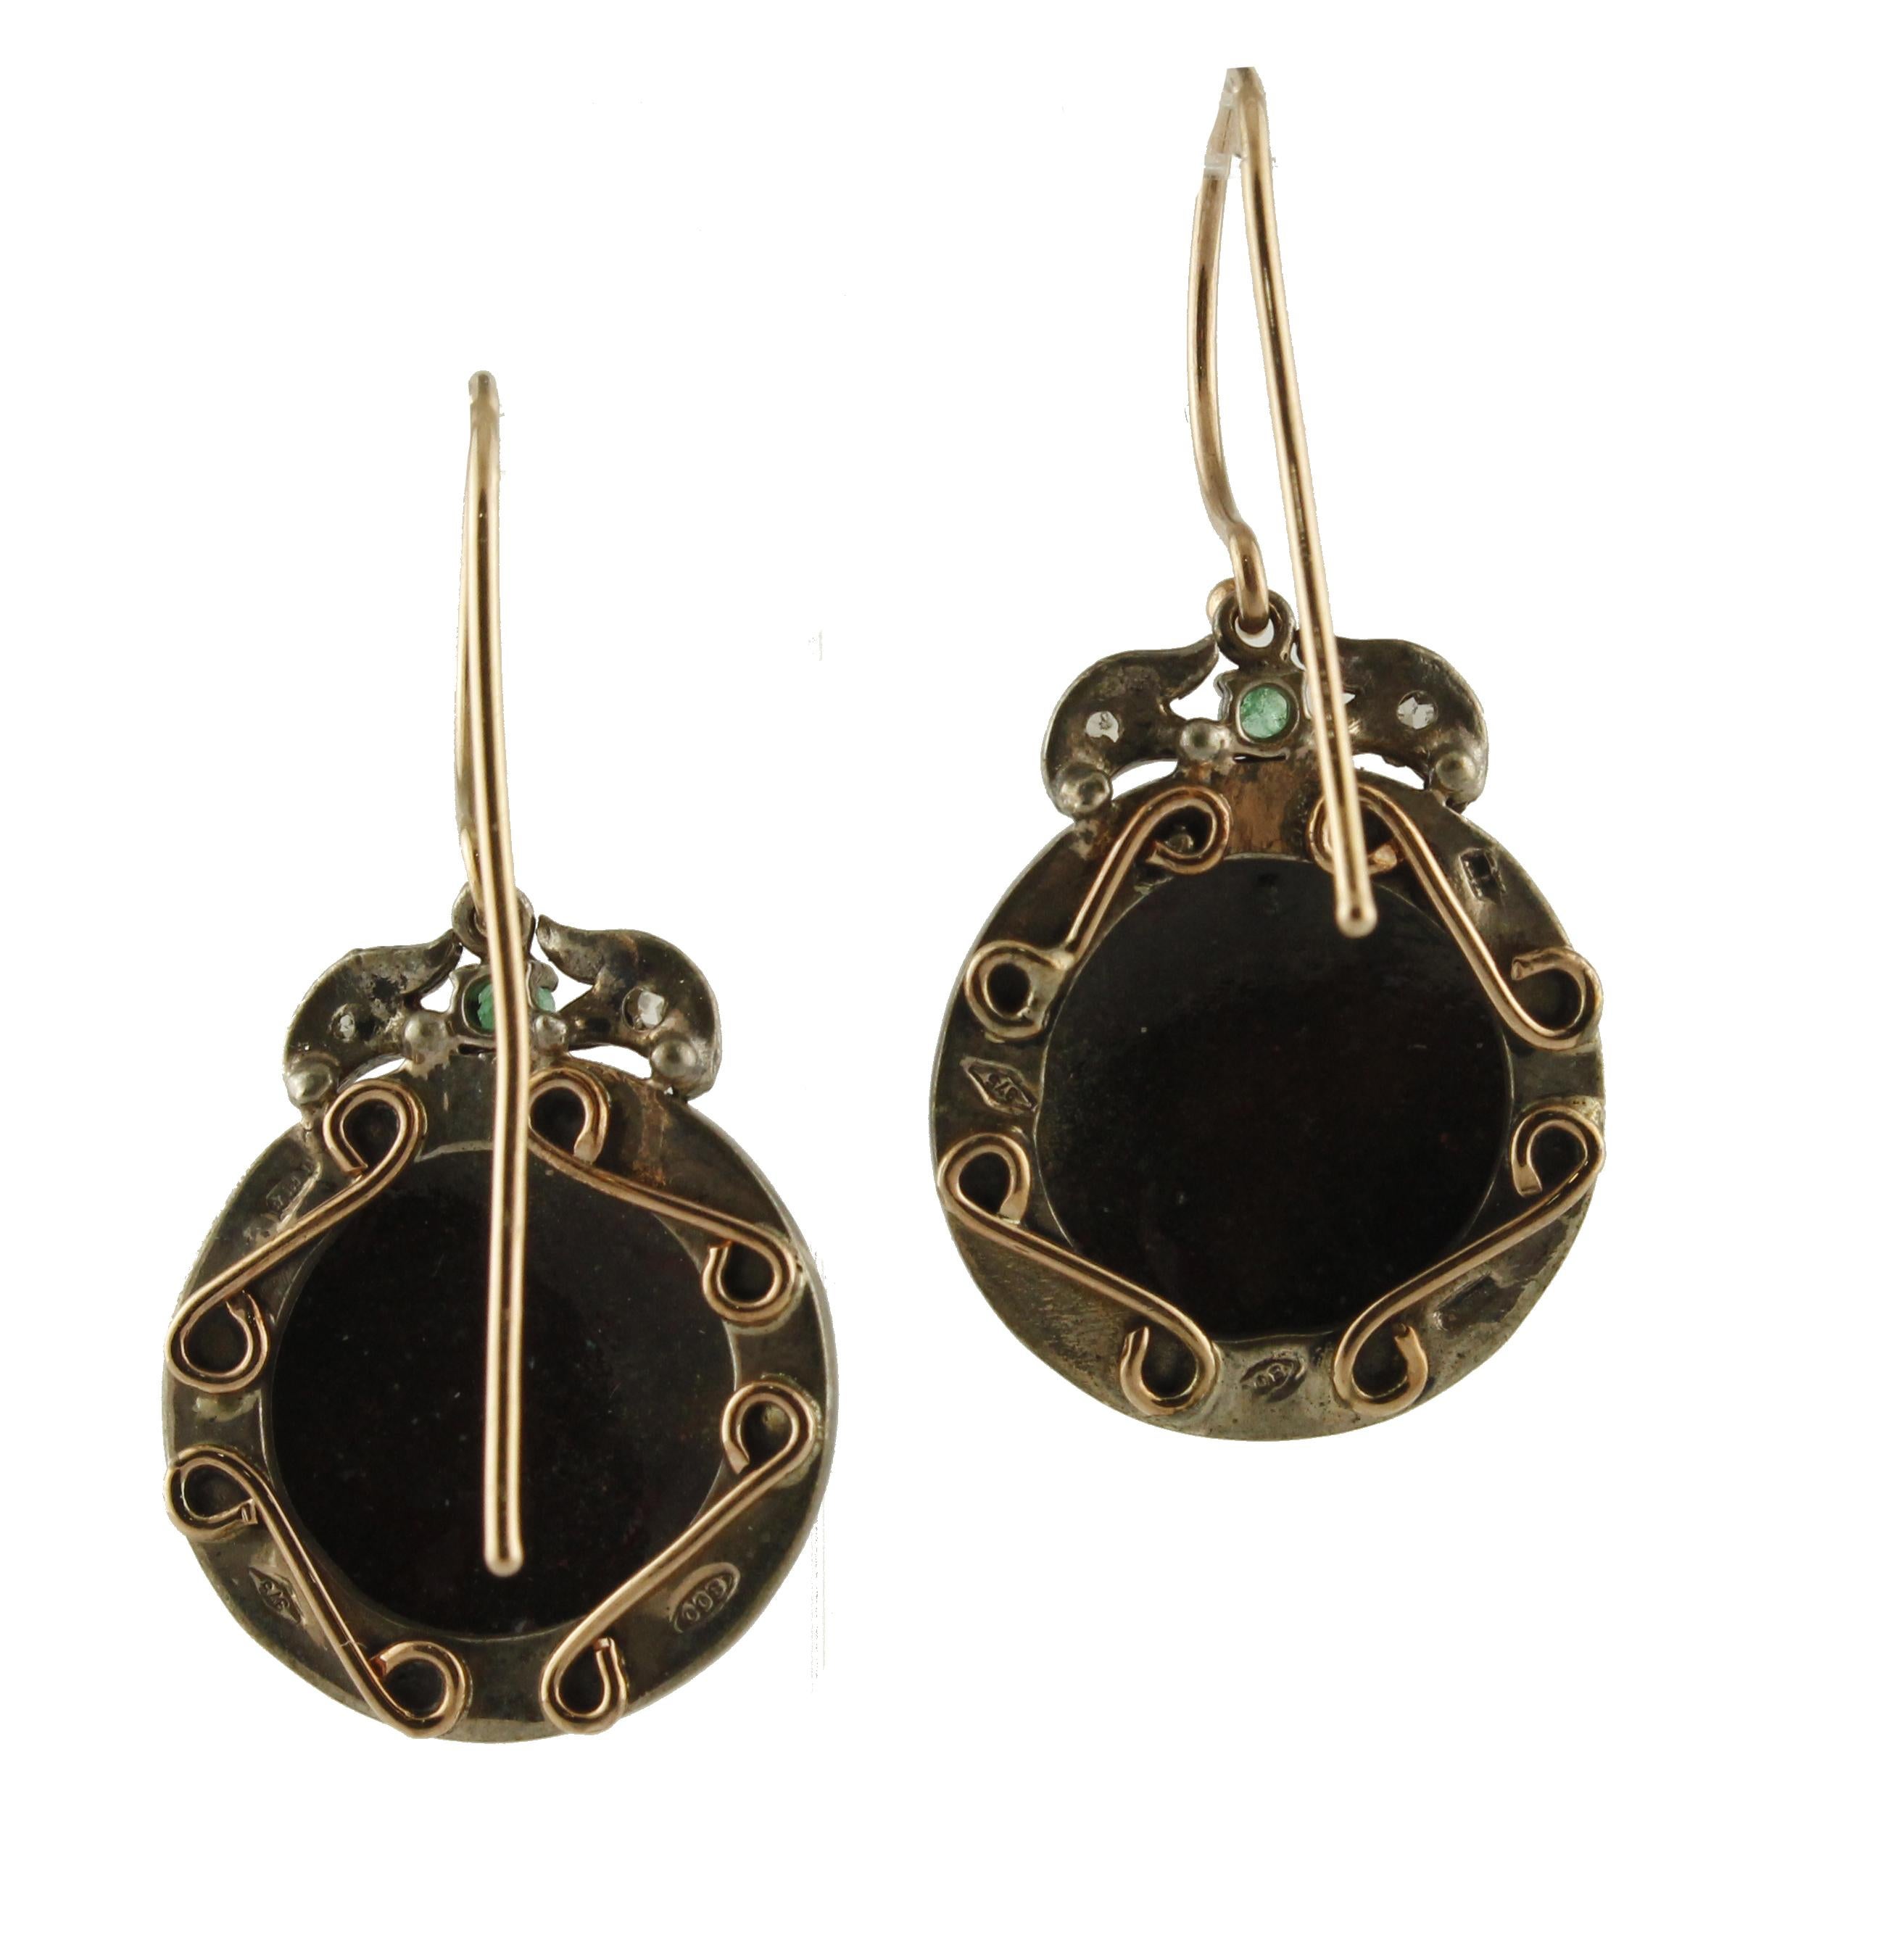 Beautiful and special earrings in 9 kt rose gold and silver, with hand-made miniature that represent Cupid, god of love, above this fabulous images there are diamonds and emeralds detailes
Diamonds ct 0.11
Emeralds ct 0.15
Stone with miniature g